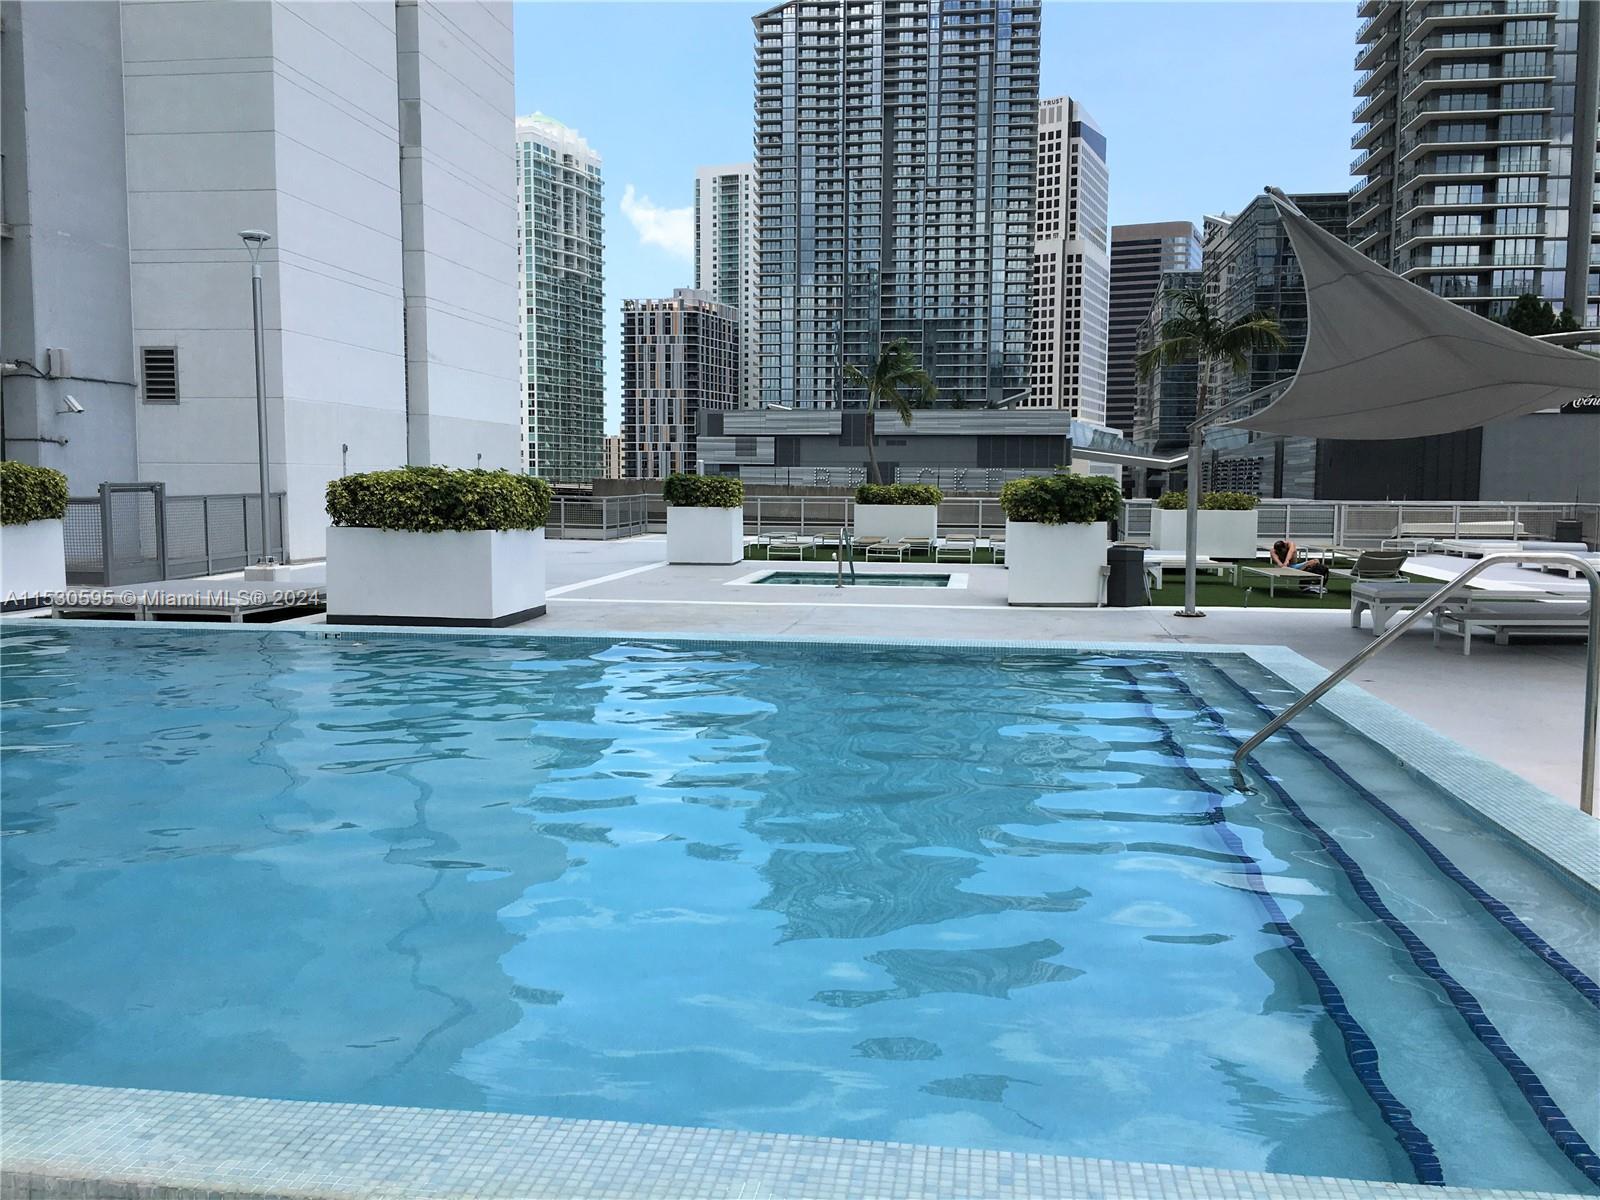 The most sought after area in Miami; Brickell! Excellent riverfront building located half block from Brickell City Center, Mary Brickell, Metrorail and Metromover, Miami water taxi, supermarkets, restaurants, bars, shops, movie theaters. 21st floor unit with 170 sq ft balcony overlooking the pool and city. This modern 1 bedroom unit has white appliances, granite countertops; washer and dryer inside. The bedroom is divided by a floor to ceiling Glass walls and a sliding door partition.On the 8th floor is a 49,000 square foot oasis offering a pool, gym, poolside cabanas, volcanic rock sauna, racquetball courts, rooftop lounge, concierge services. Security, 24 hour valet service, assigned parking space . Year lease only. No Pets allowed in the building for tenant's .